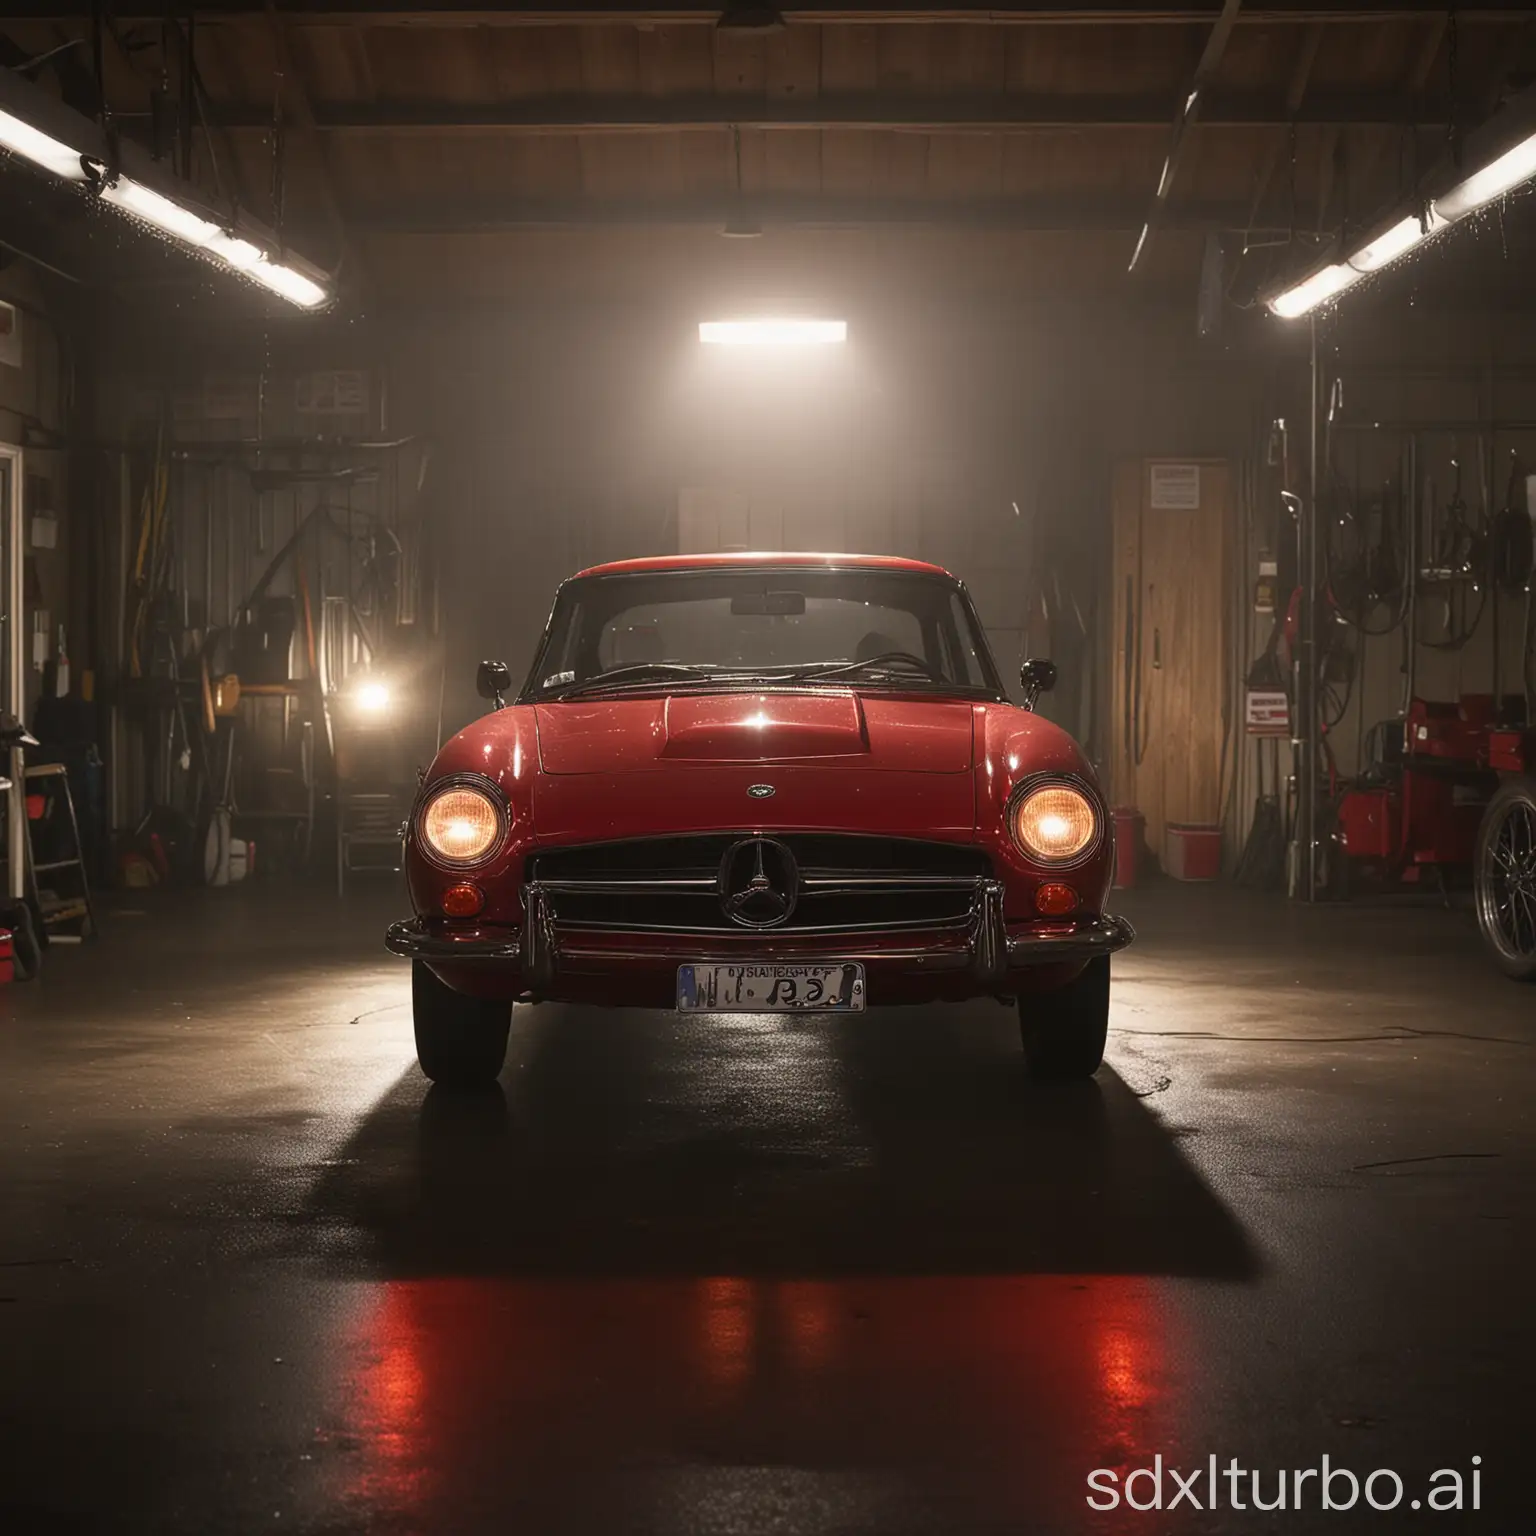 A shiny red car parked in a dimly lit garage. The car is the center of attention, with the light shining down on it.